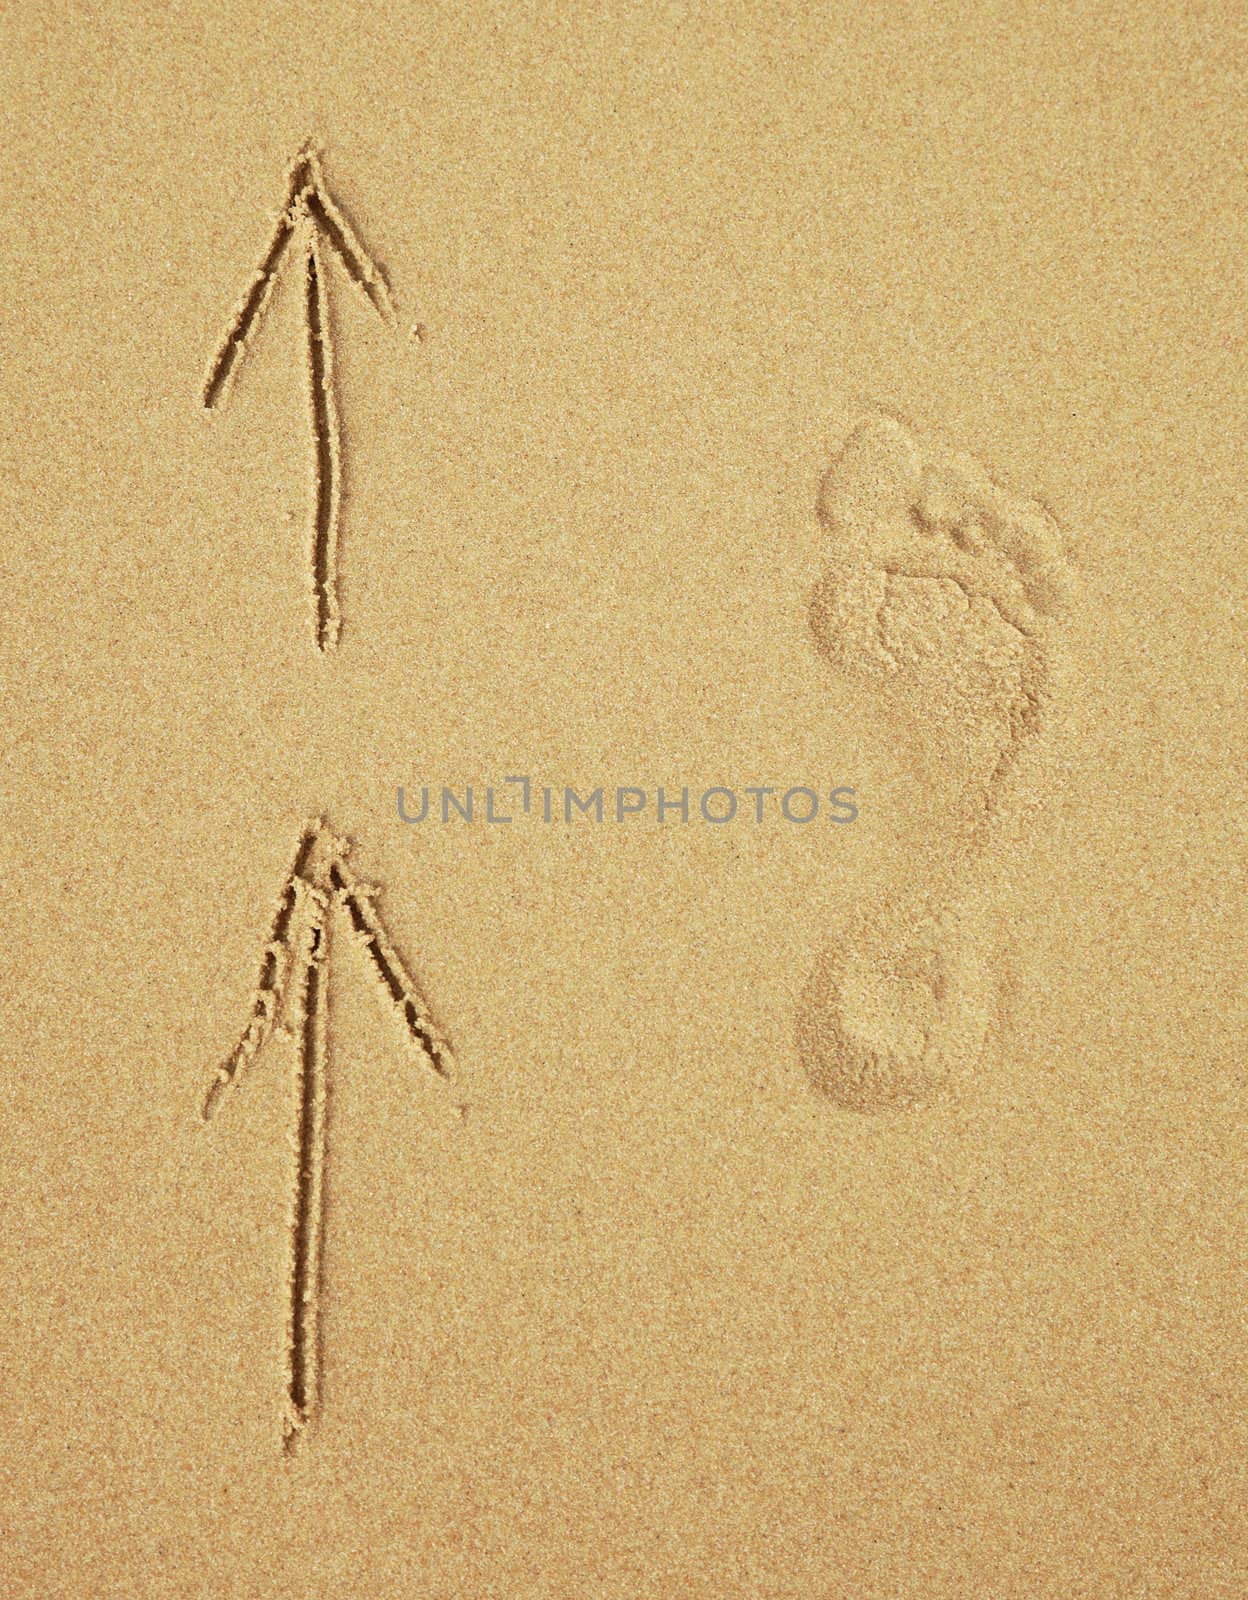 Trace of a human foot on sand. Tourist traffic. by pzaxe